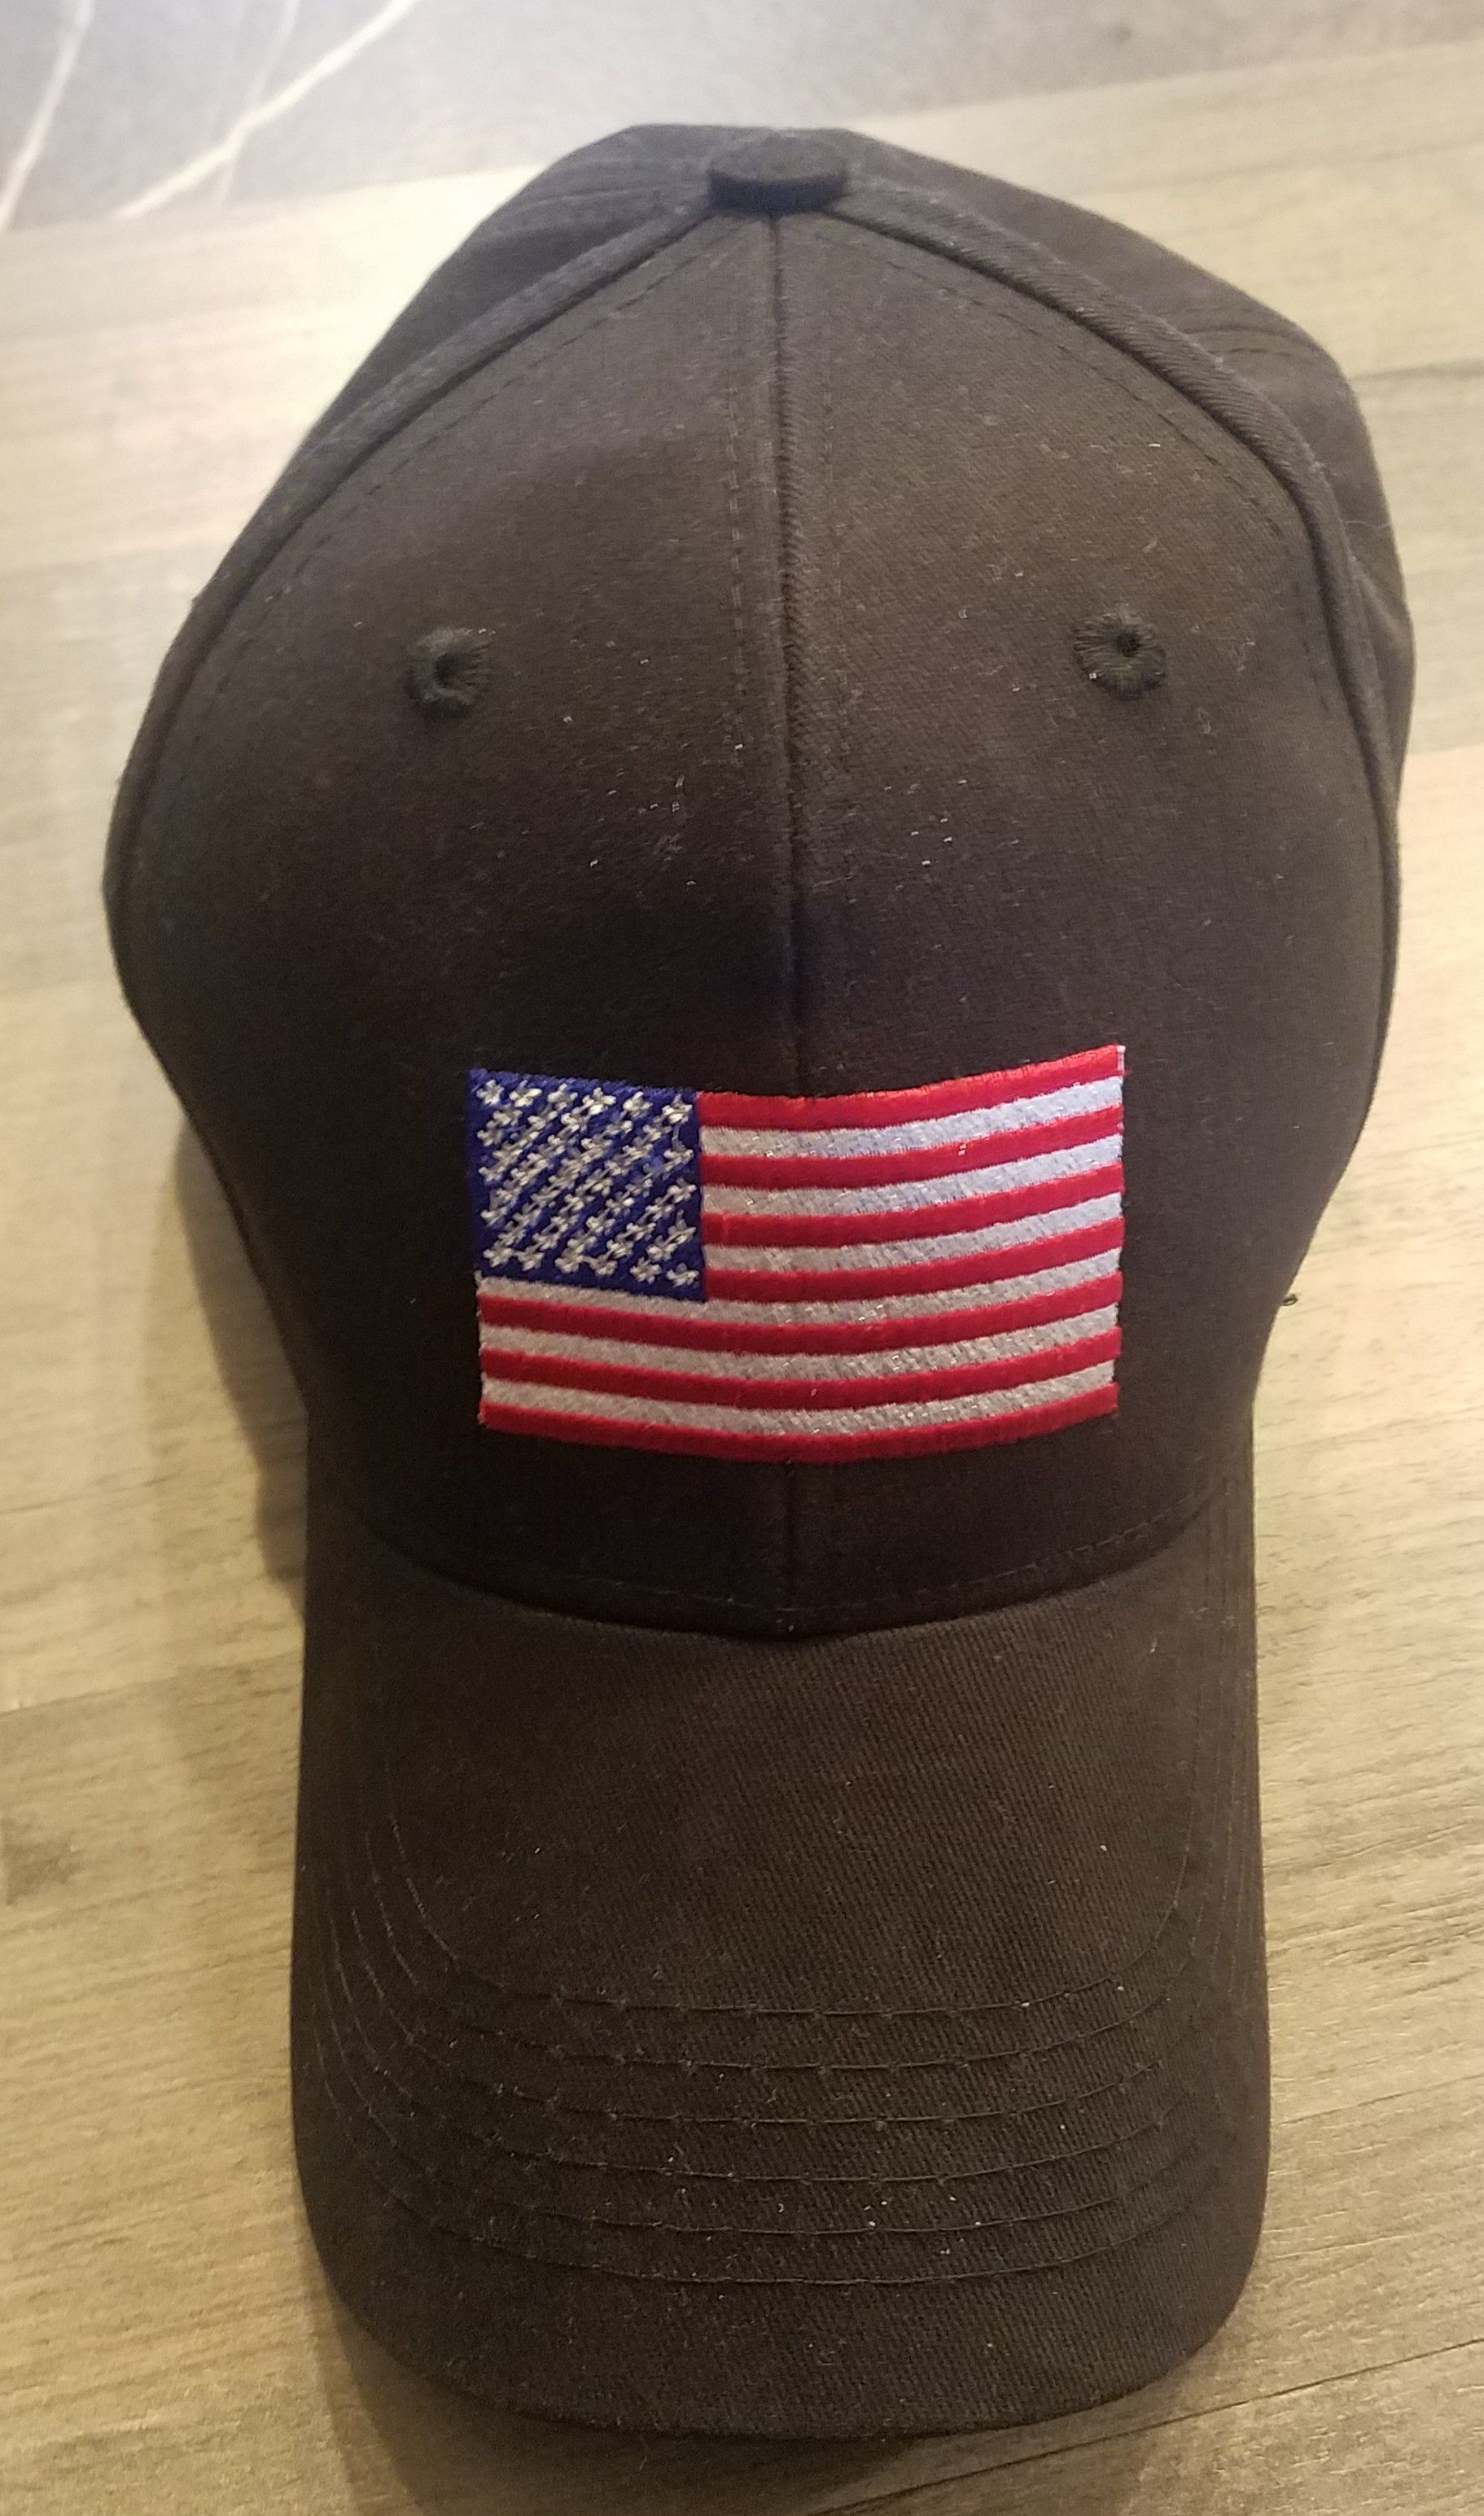 New hat with USA Flag